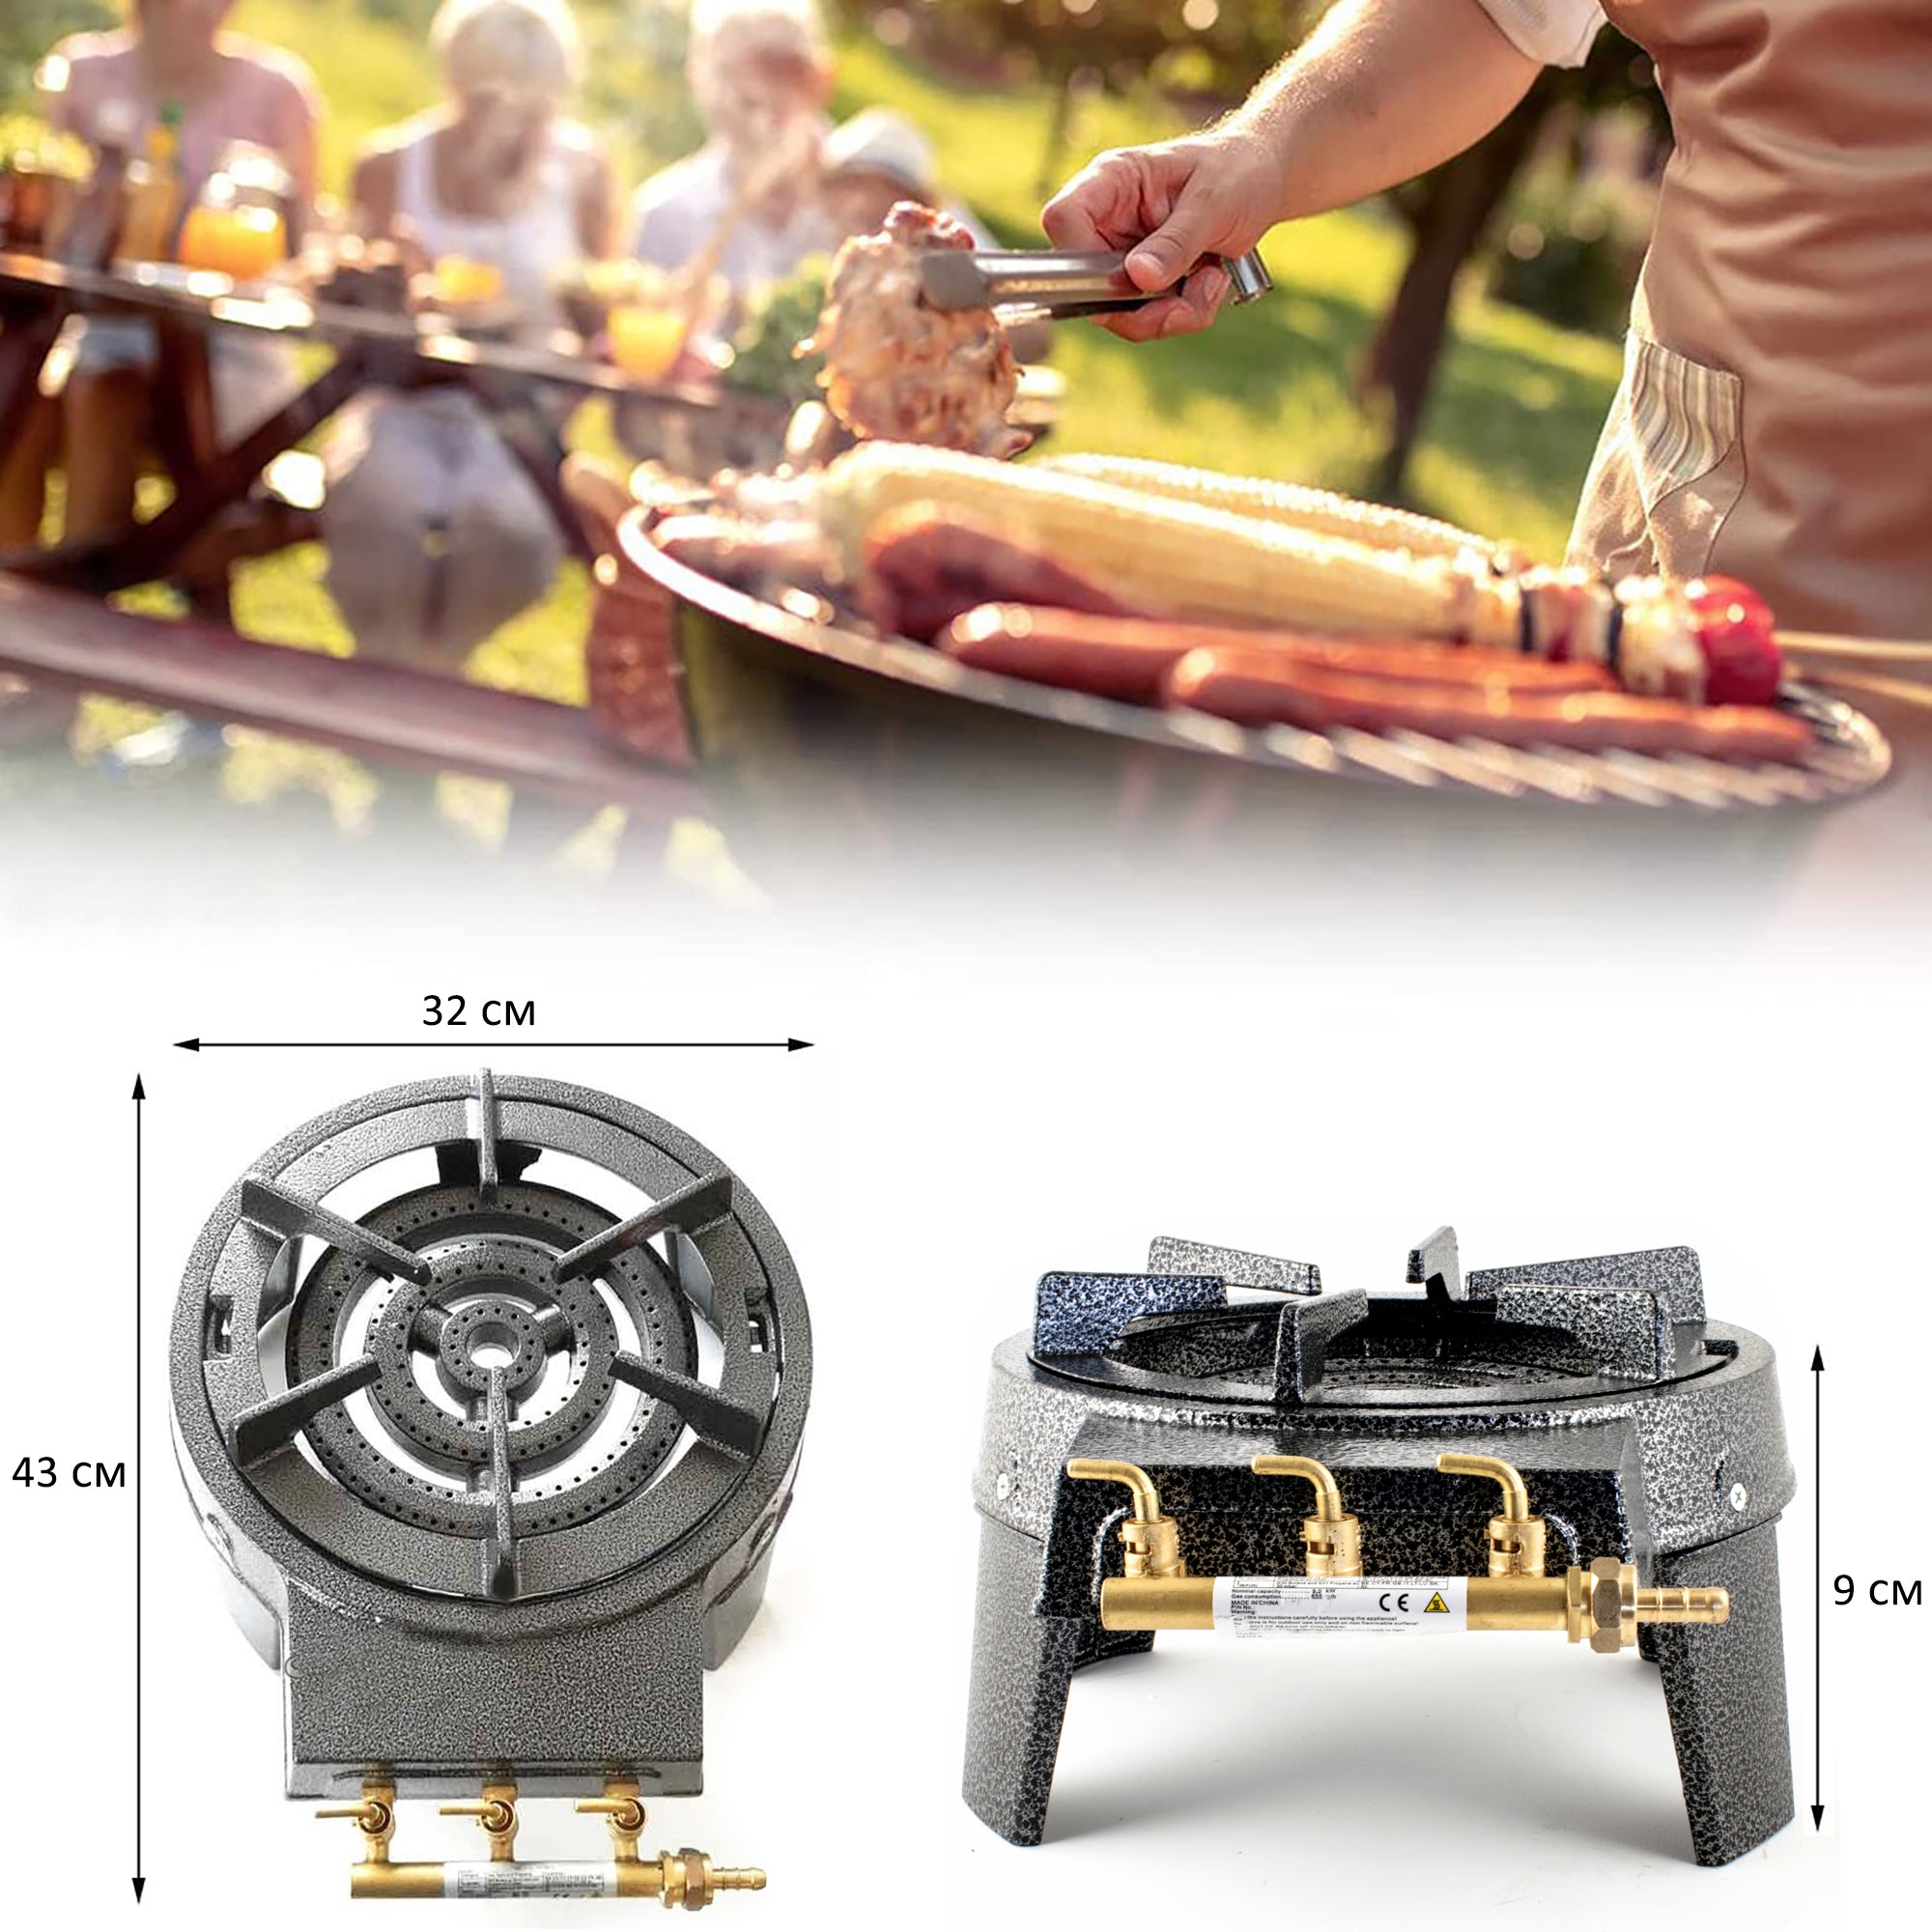 OsmiumPro Indian Single Burner Gas Stove Ring Kada 15''X15'' Circle Chulha/  Bhatti Stove (Commercial/ Industrial Purpose) Stainless Steel Manual Gas  Stove Price in India - Buy OsmiumPro Indian Single Burner Gas Stove Ring  Kada 15''X15'' Circle ...